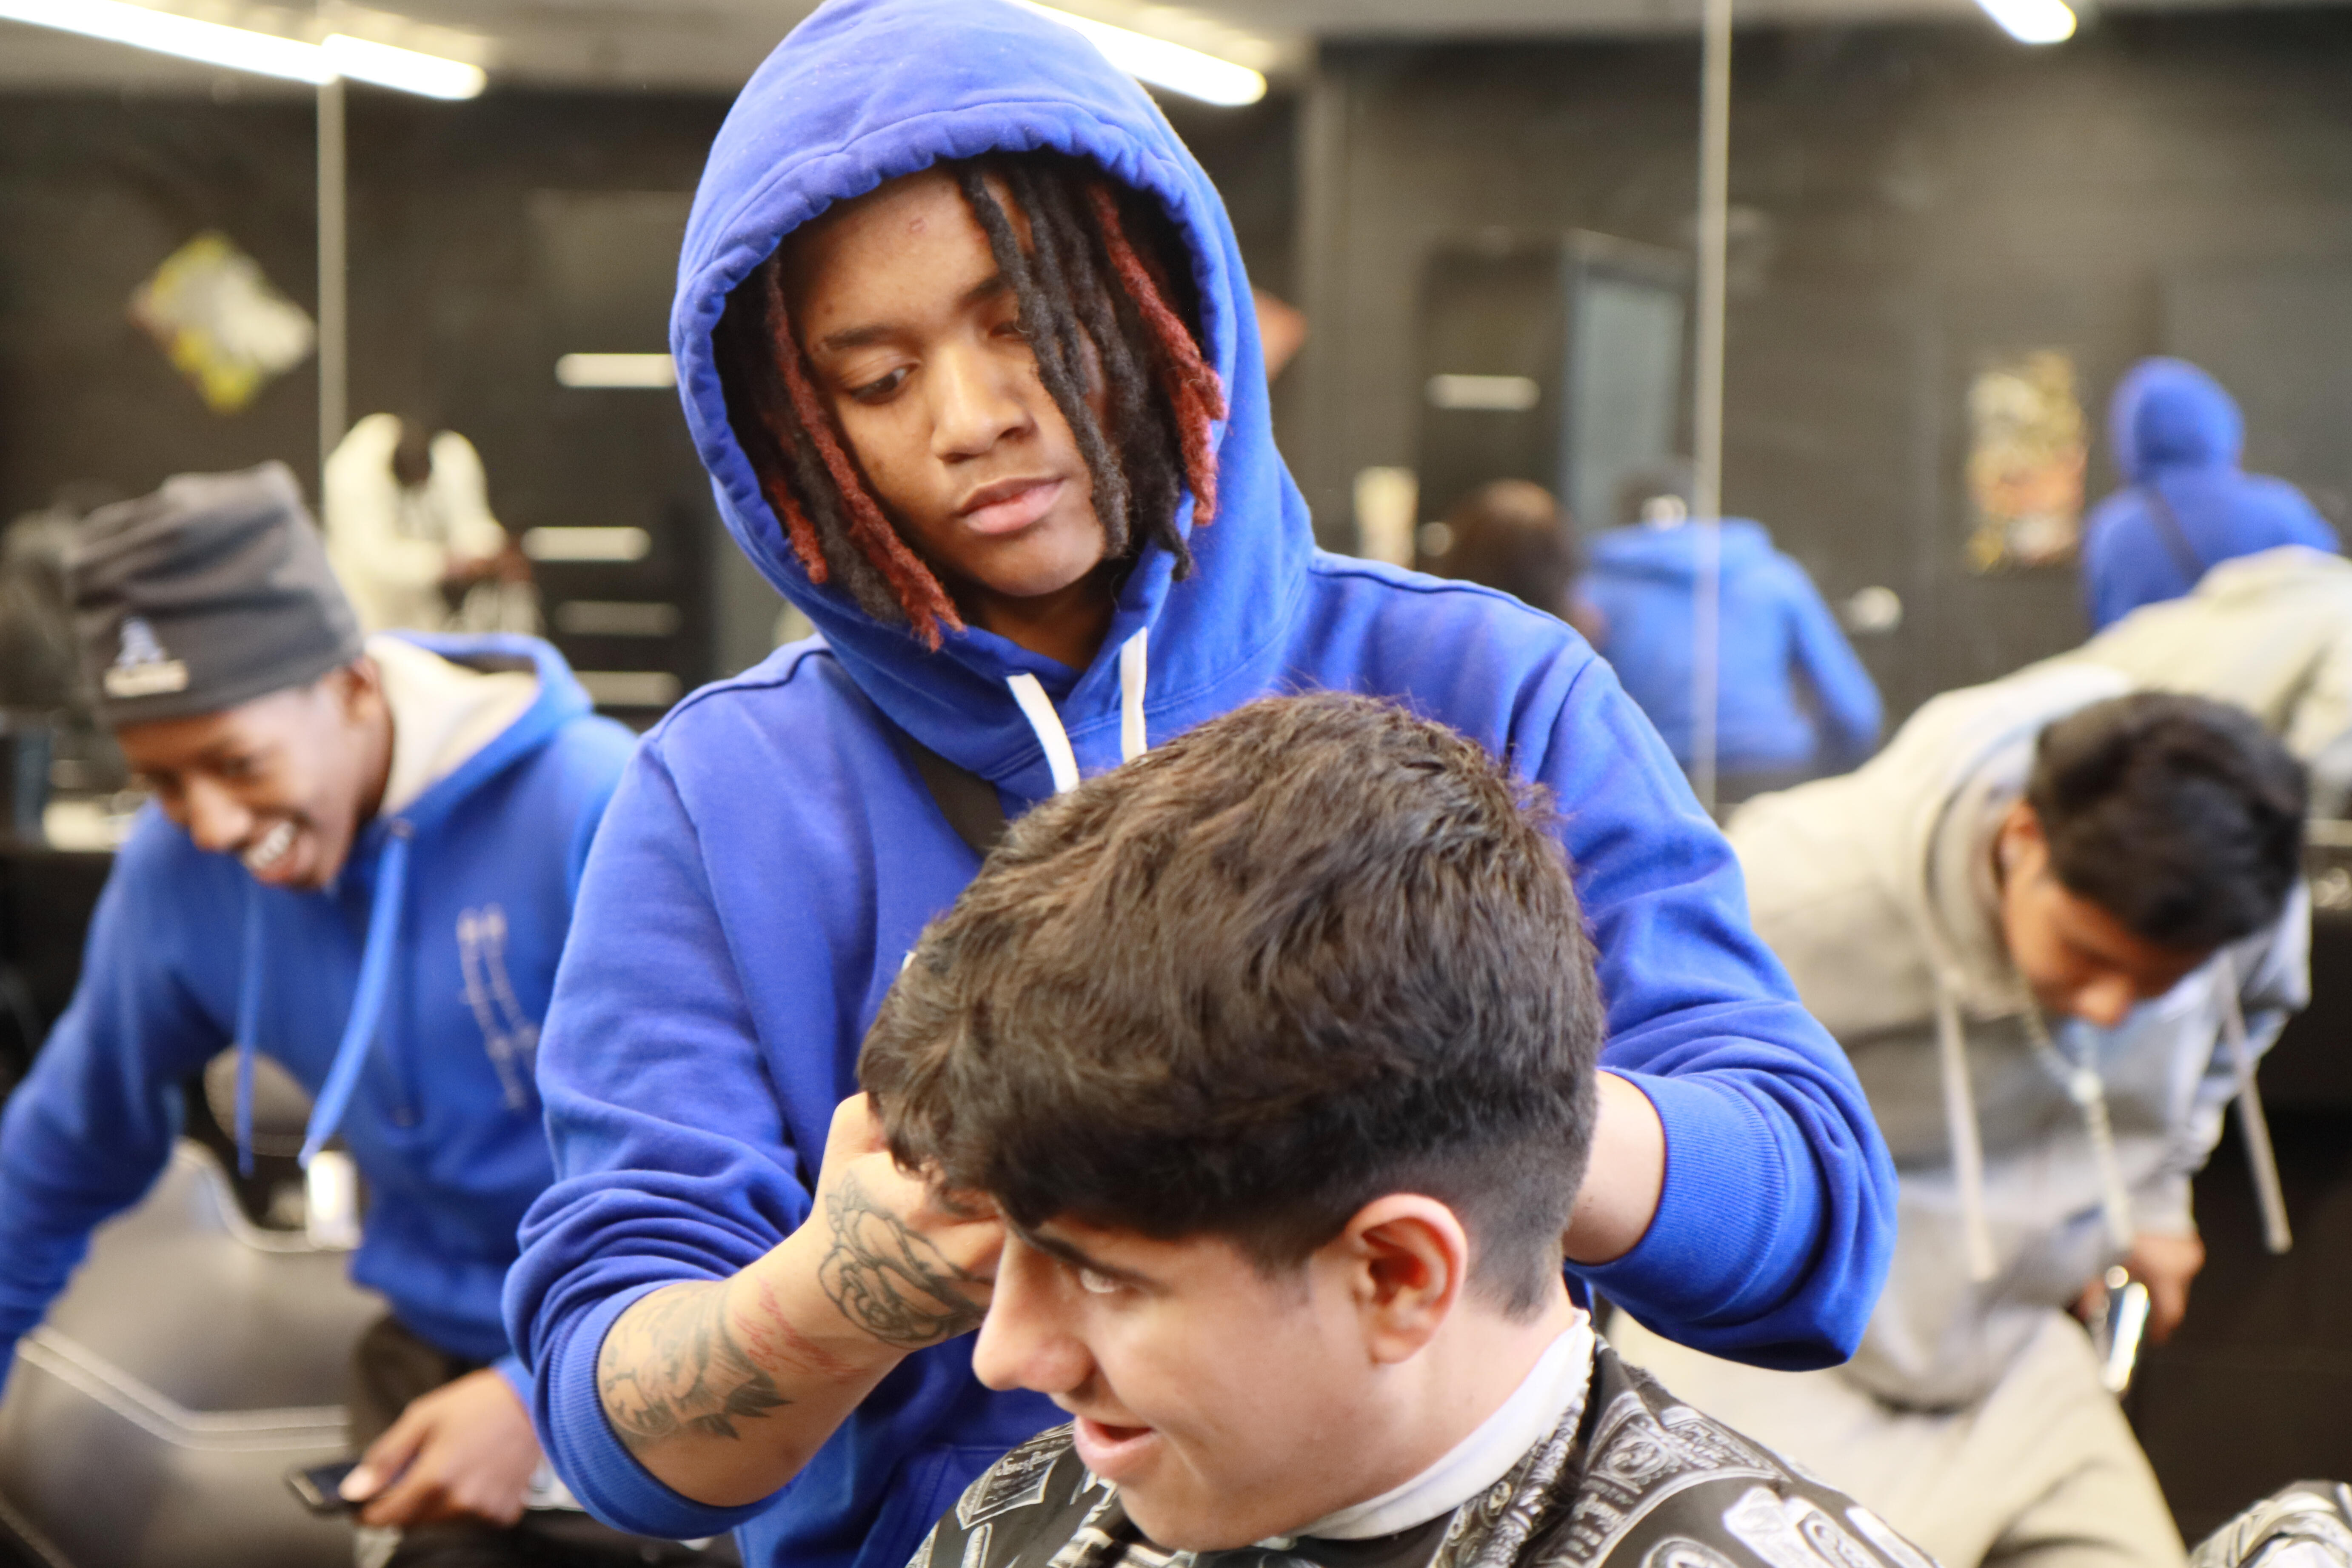 Barbering students